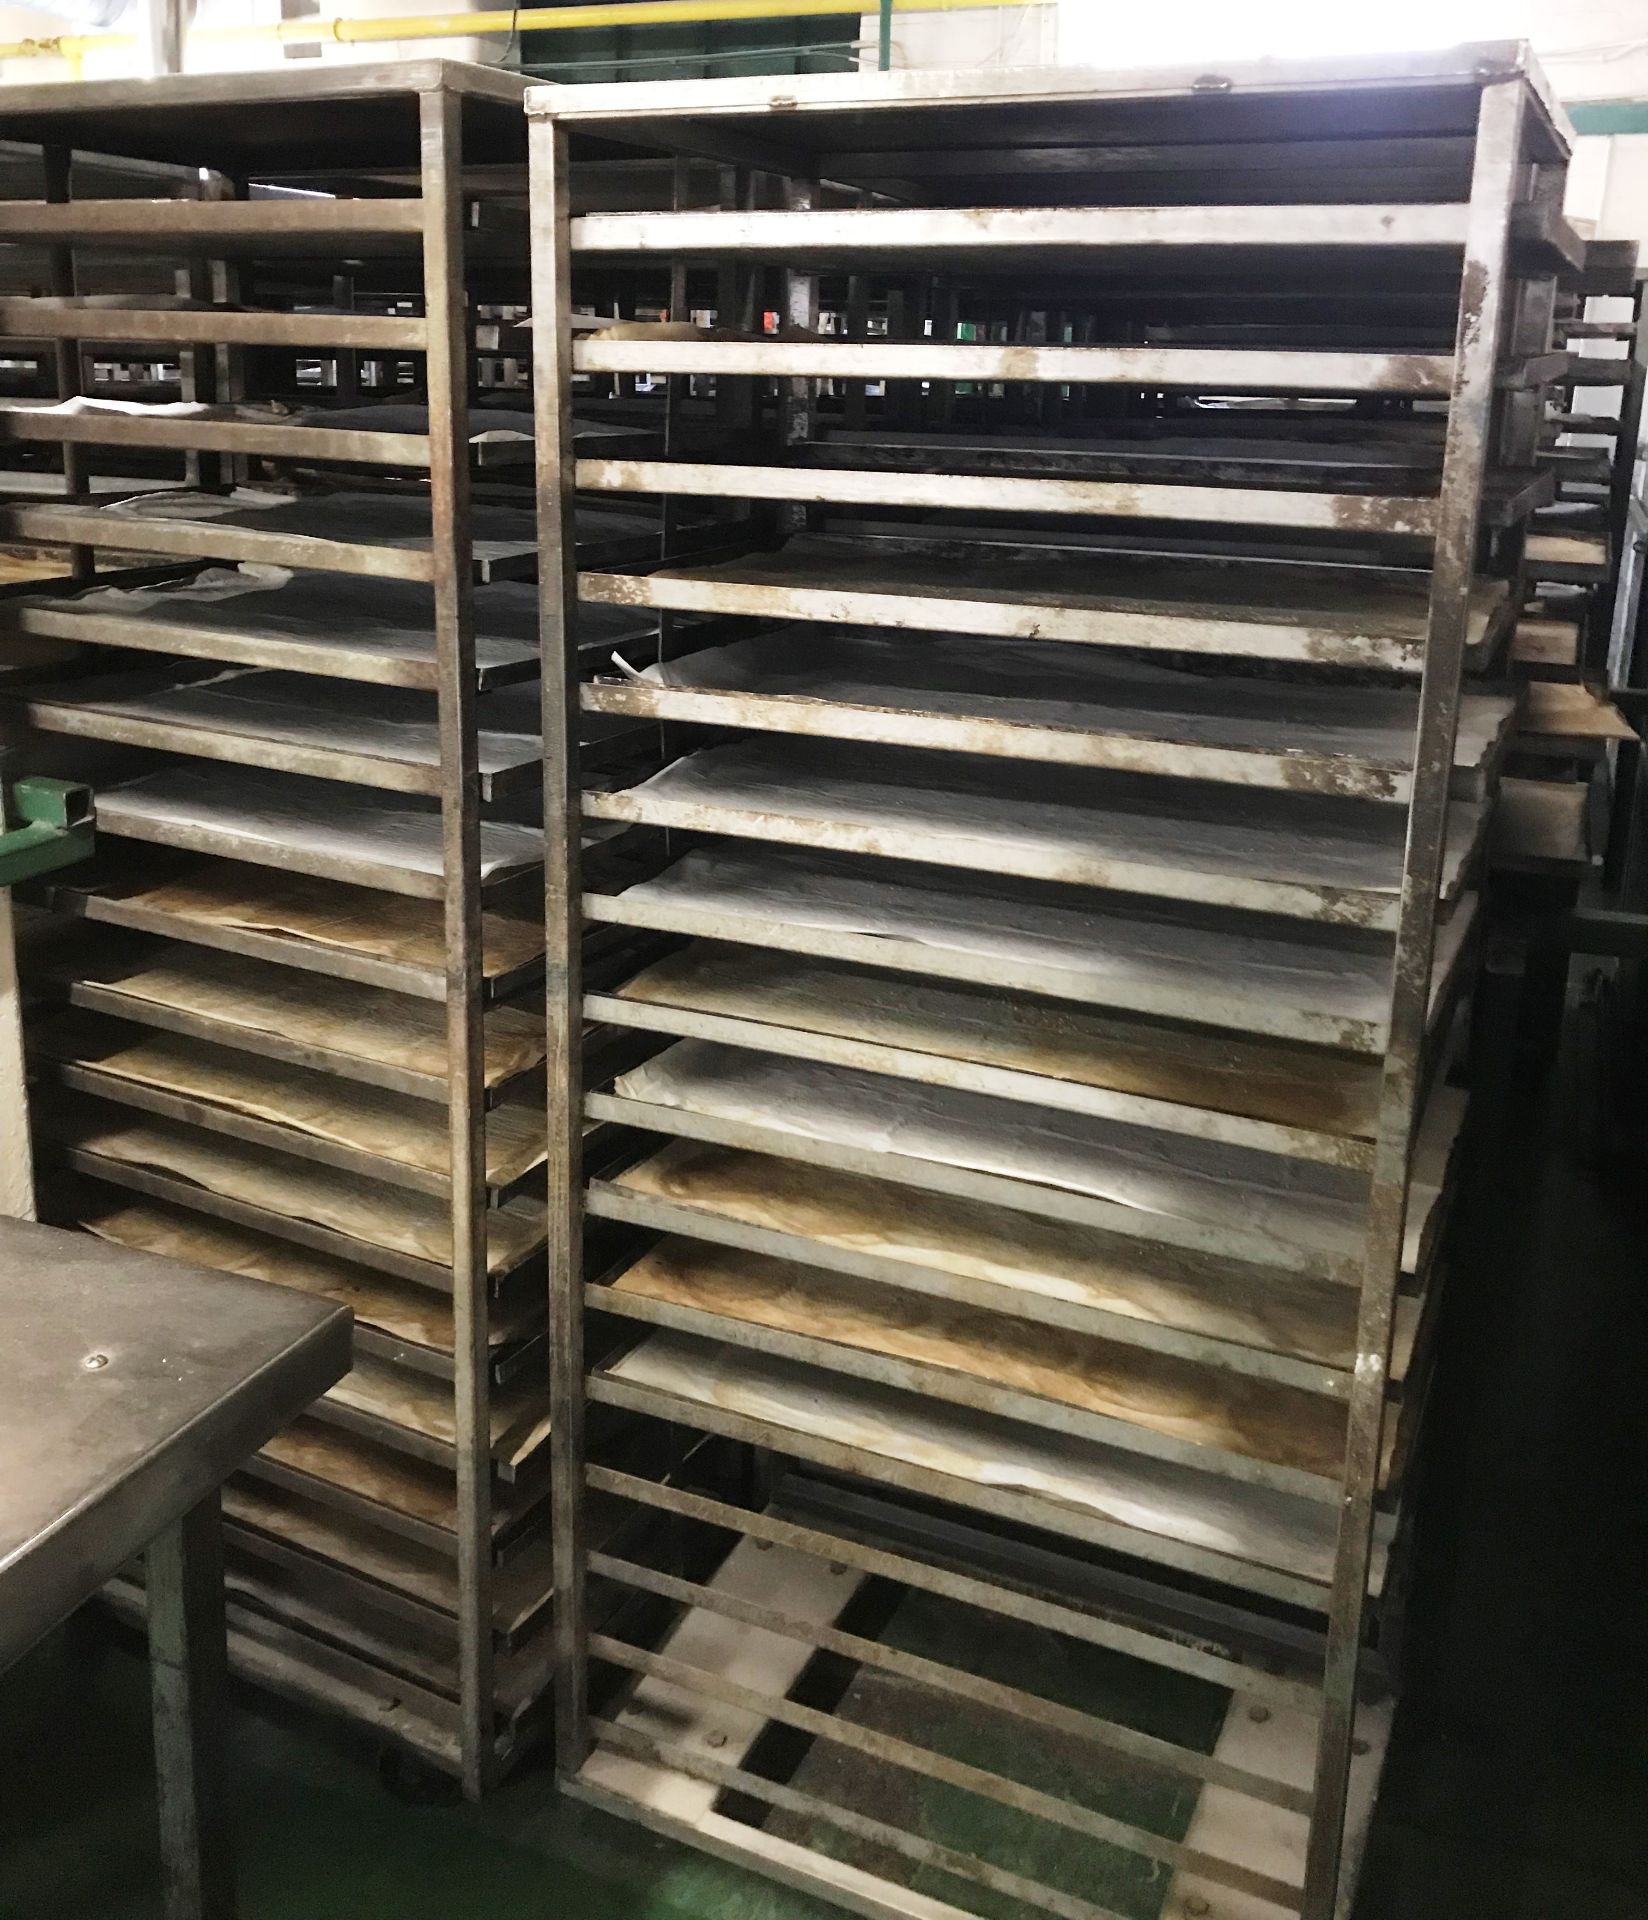 12 x Various Bakery Racks & Trays - As Pictured - Image 2 of 2